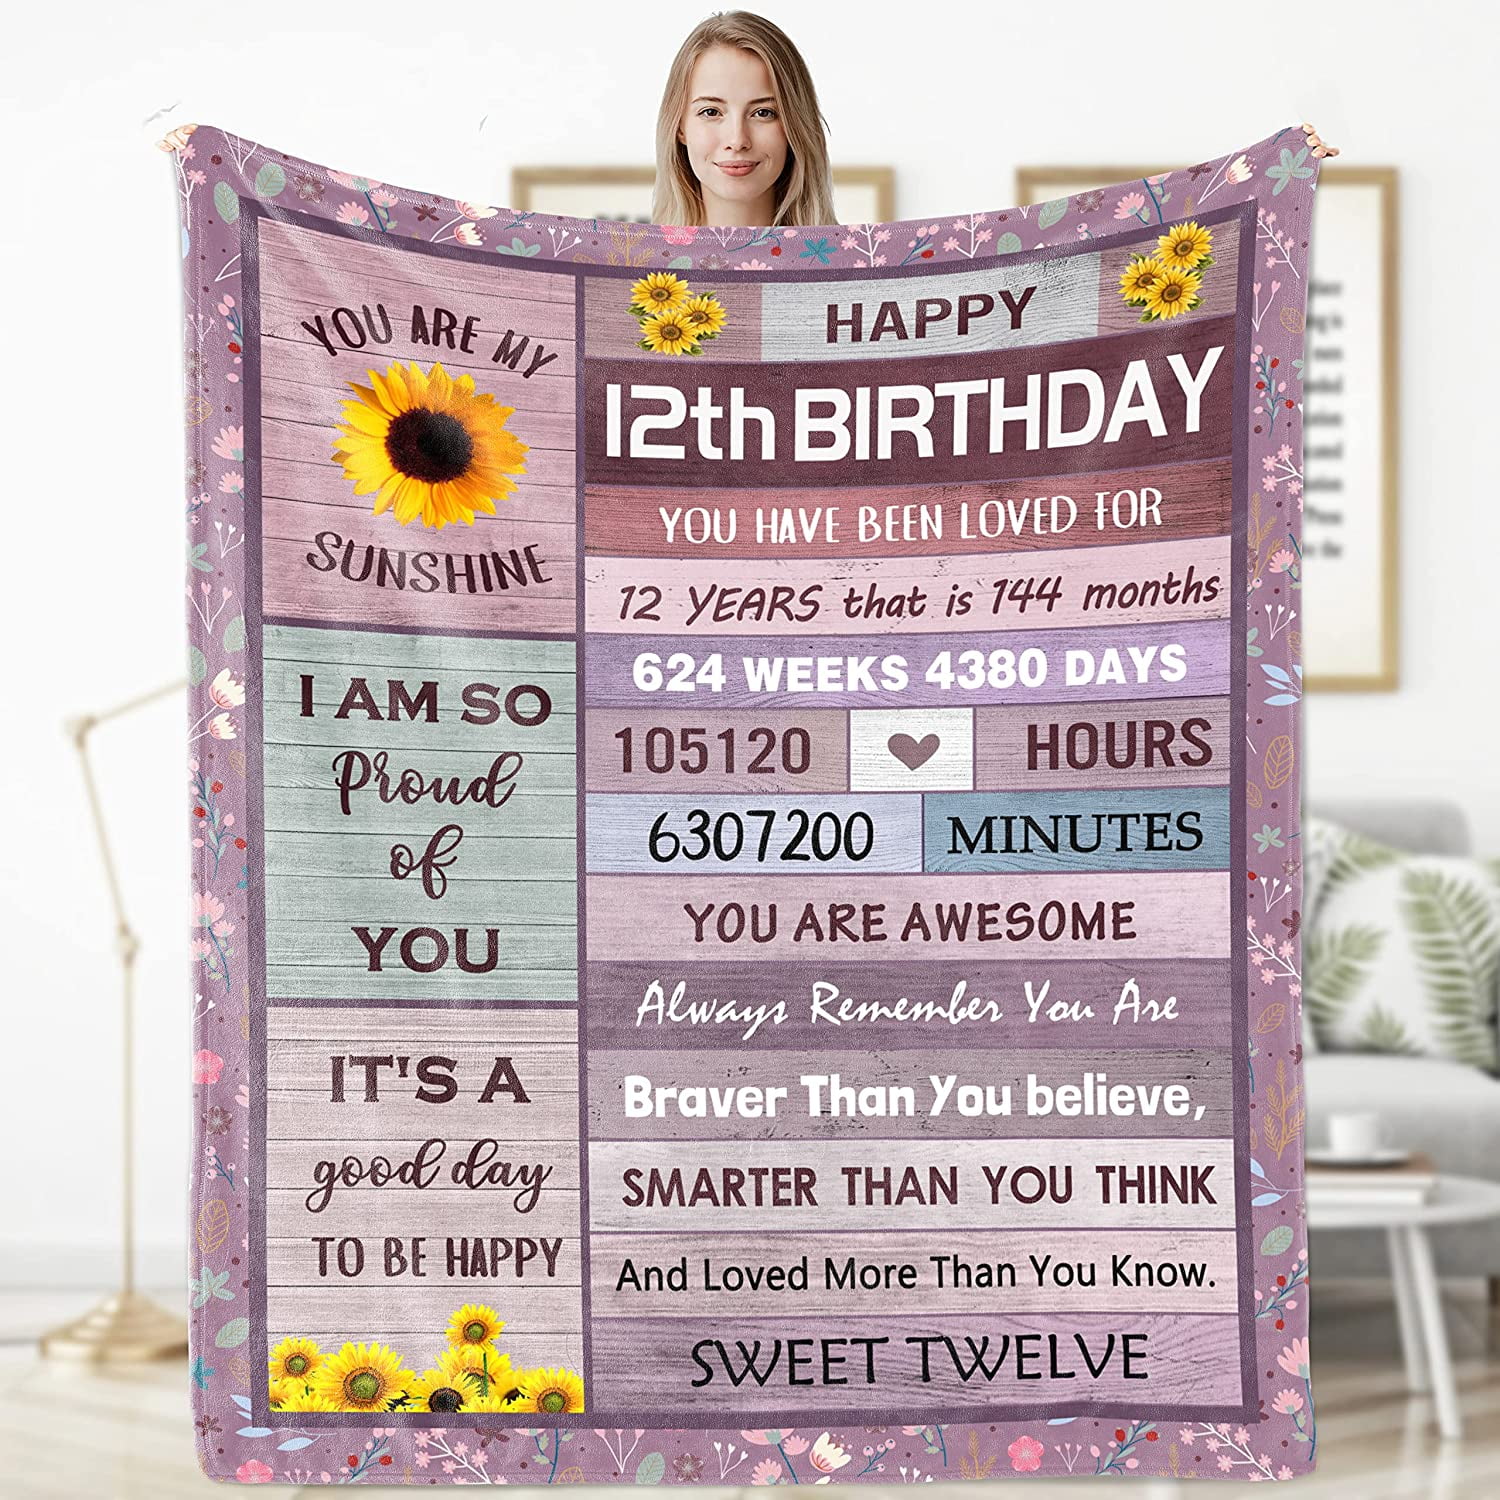 Rooruns 15 Year Old Girl Gifts for Birthday Blanket, 15th Birthday Gifts for Teen Girls, Quinceanera Gifts, Best 15 Year Old Girl Gift Ideas, Birthday